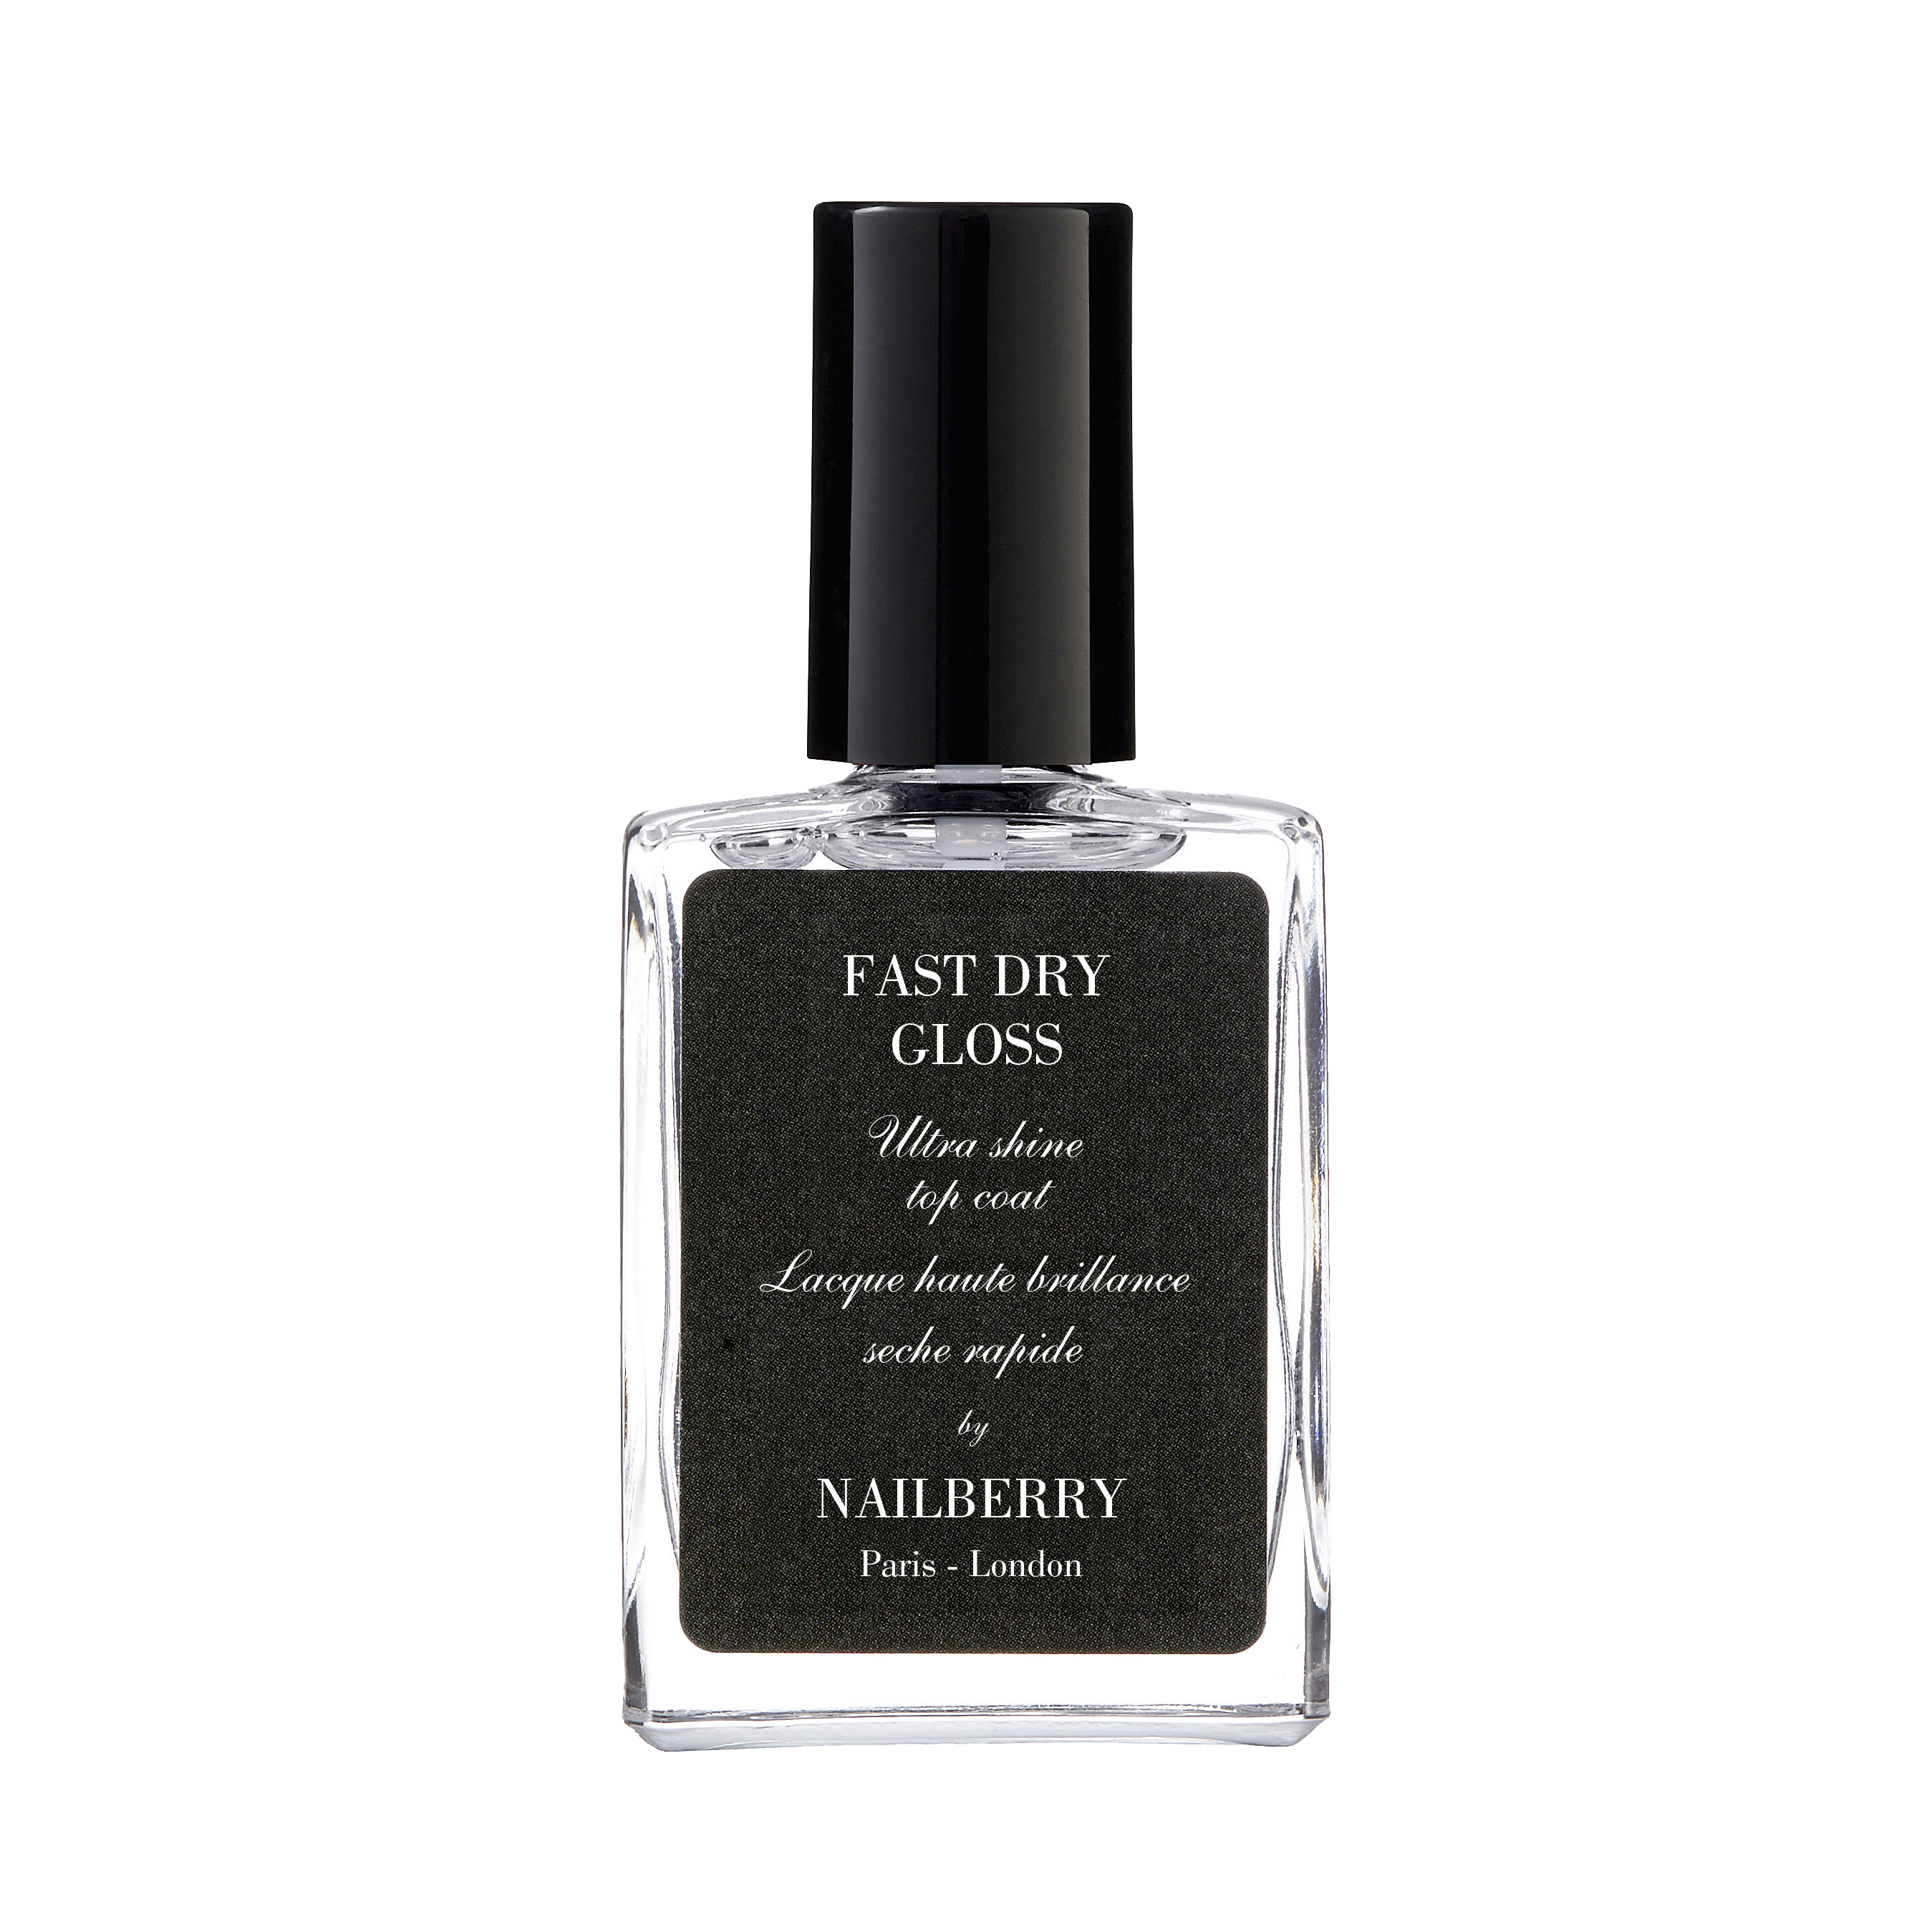 NAILBERRY Fast dry gloss